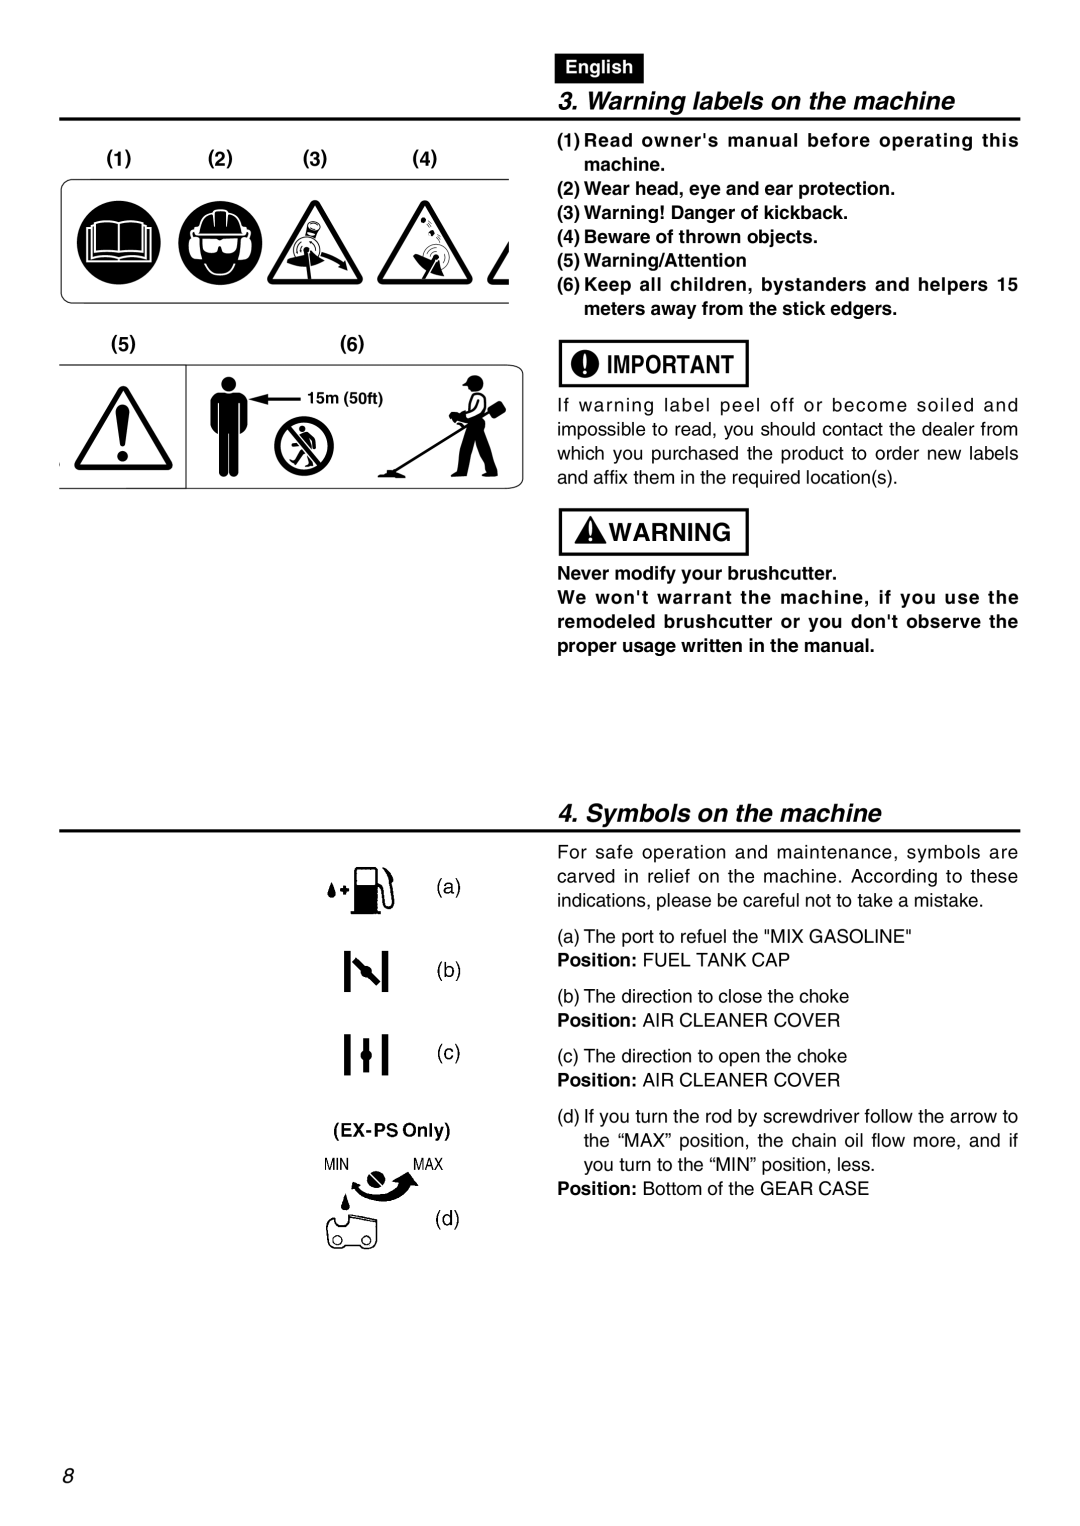 RedMax EXZ2401S-PH-CA manual Warning labels on the machine, Symbols on the machine, 1 2 3, English 